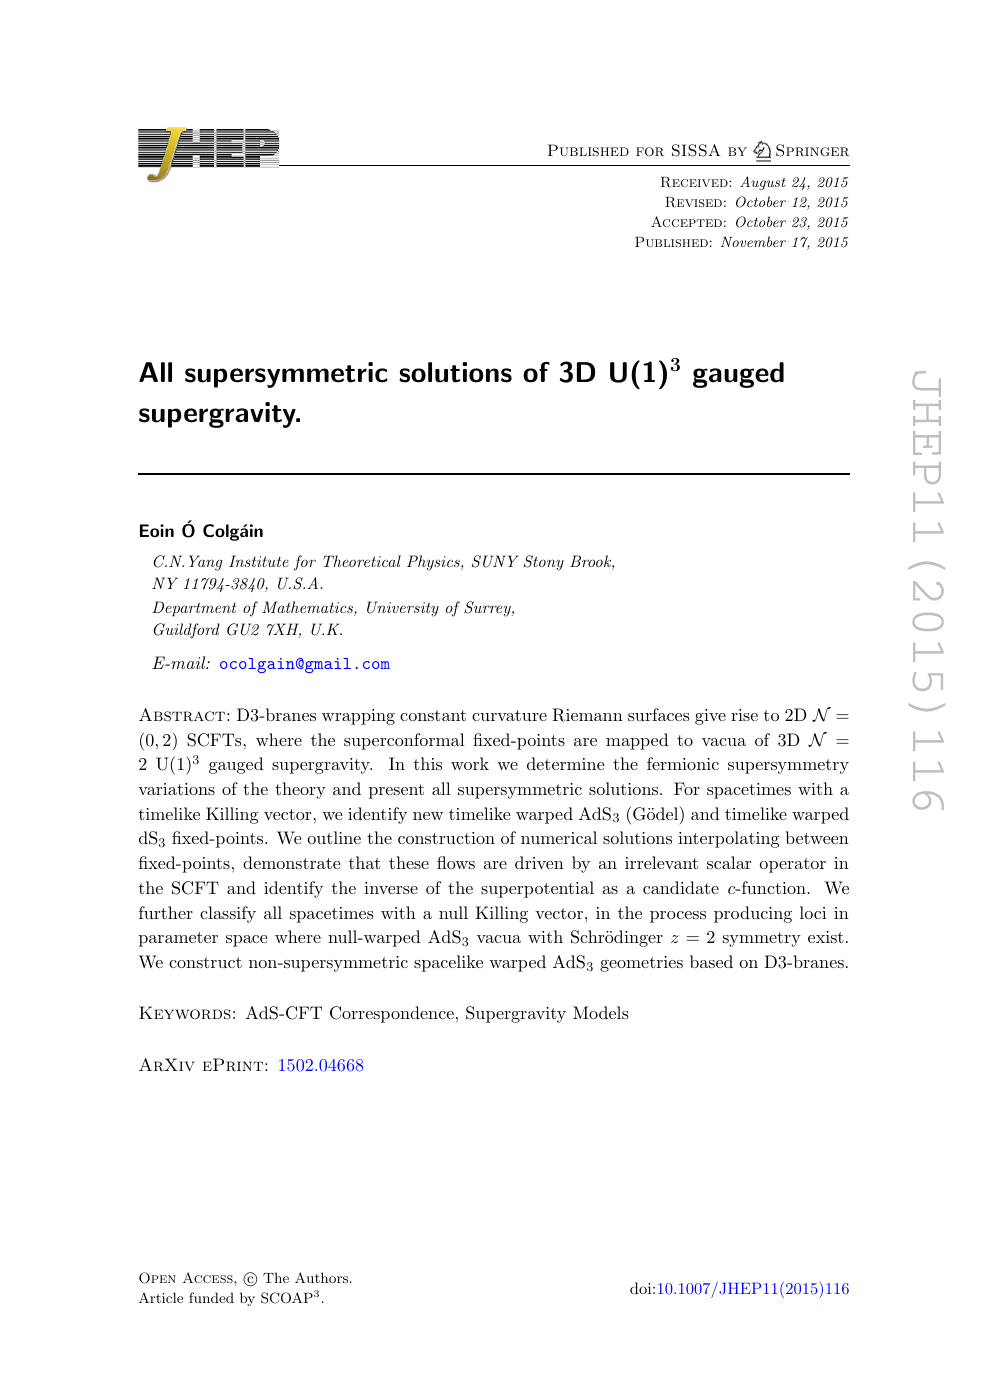 All Supersymmetric Solutions Of 3d U 1 3 Gauged Supergravity Topic Of Research Paper In Physical Sciences Download Scholarly Article Pdf And Read For Free On Cyberleninka Open Science Hub